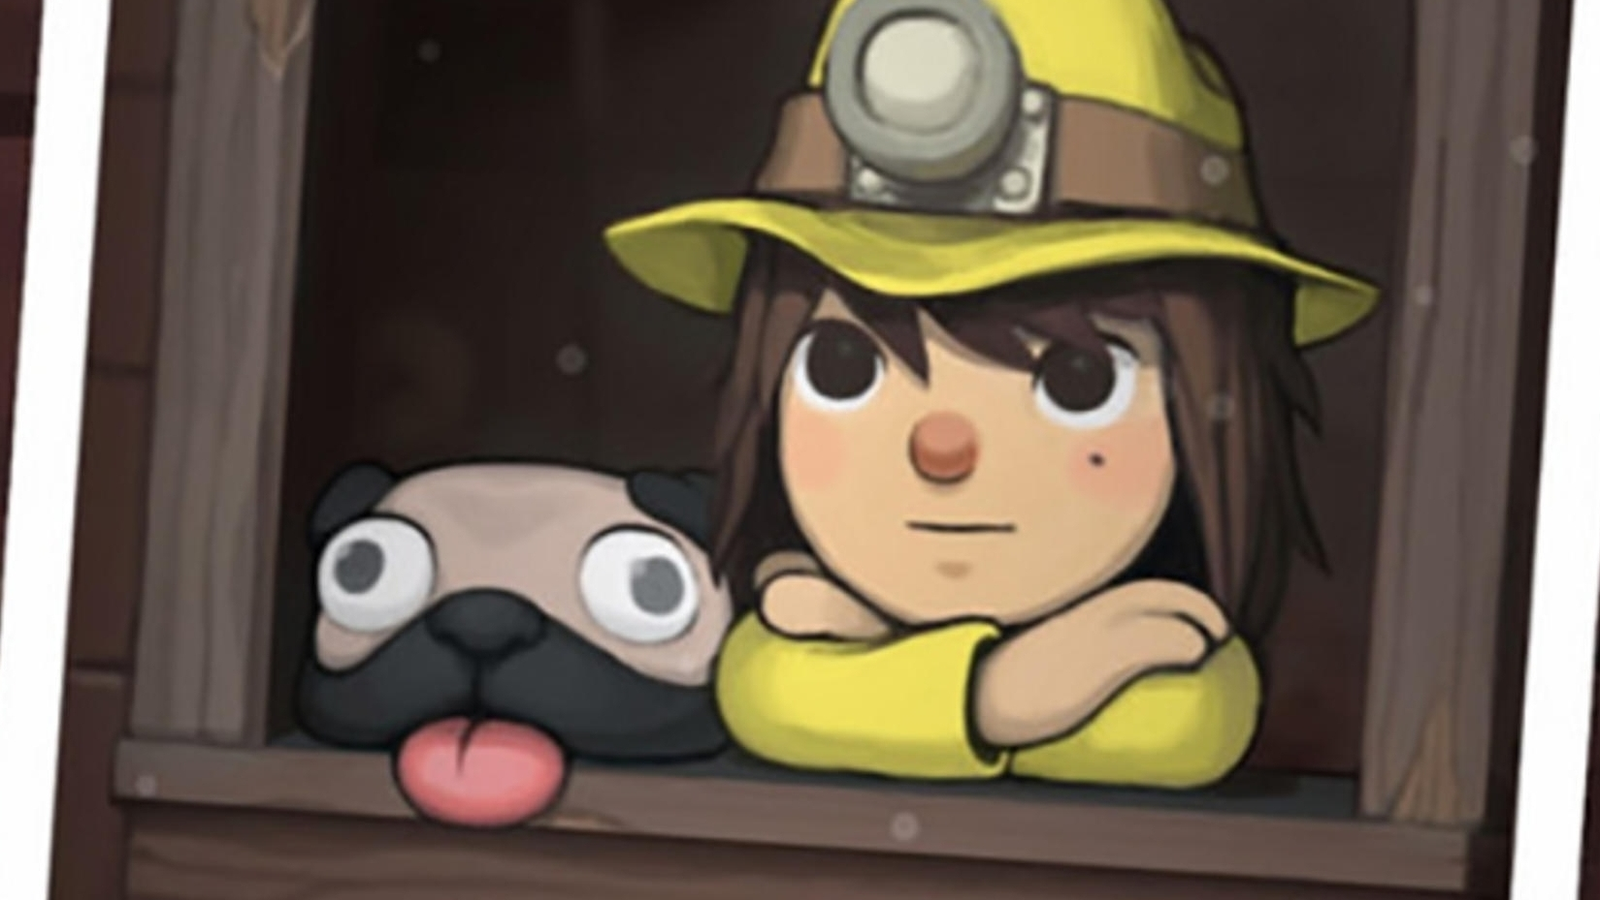 Spelunky 2 Is Now Available For PC, Xbox One, And Xbox Series X